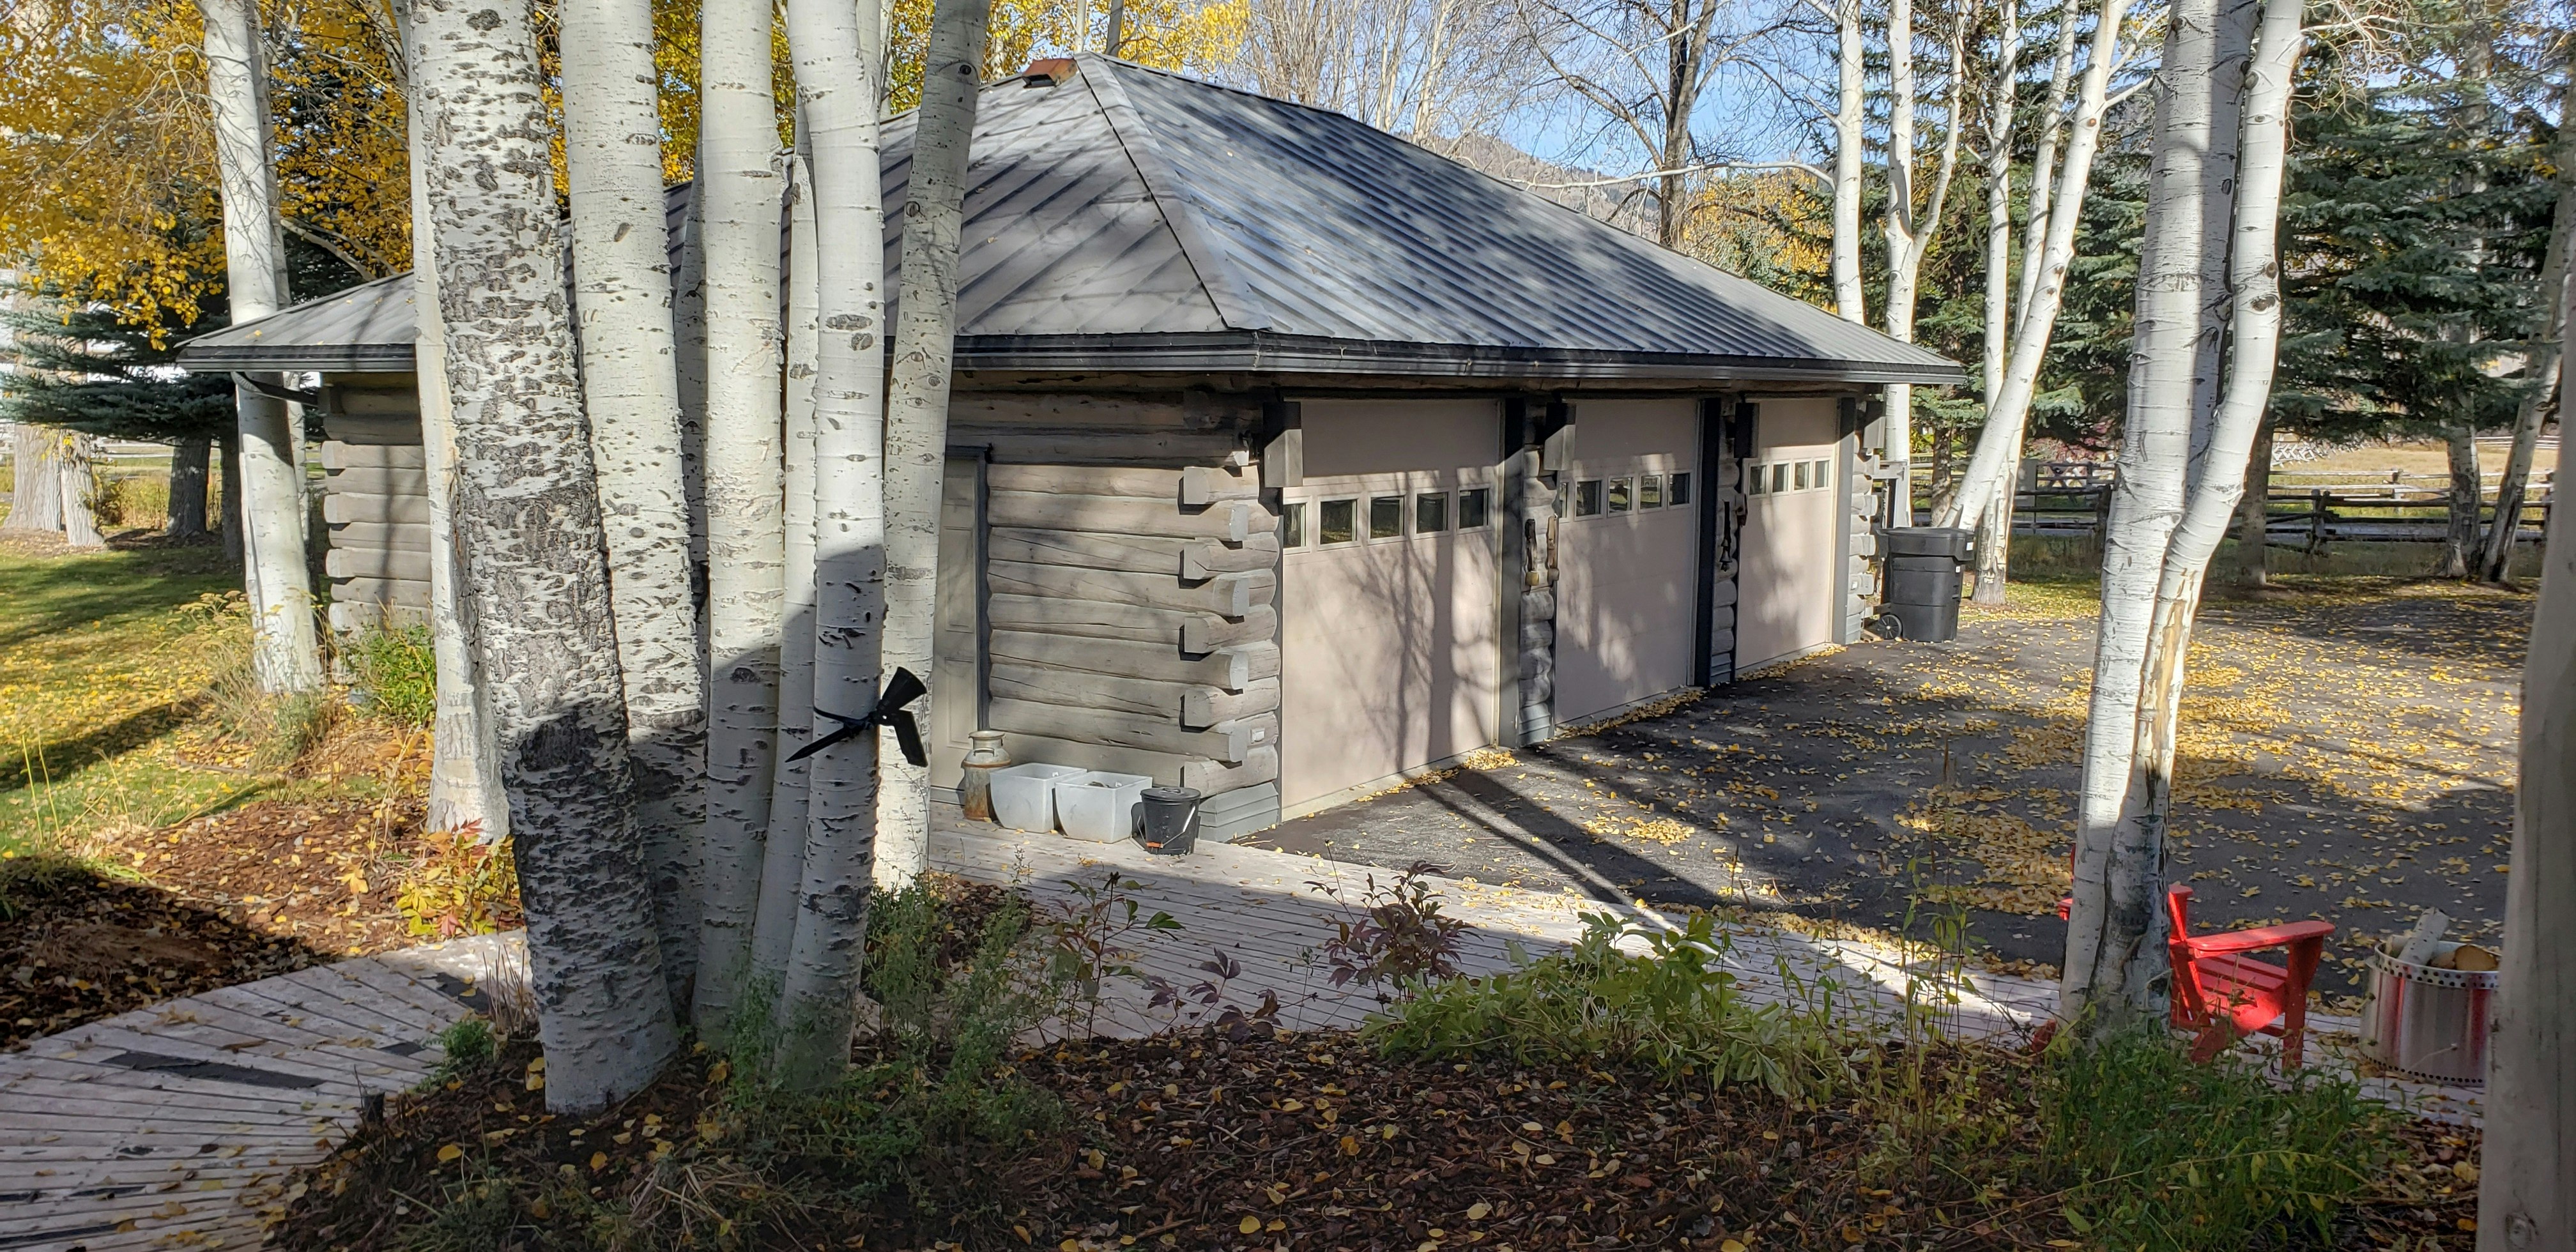 The three-car heated garage is a short walk from the Western Star Ranch's cabin.